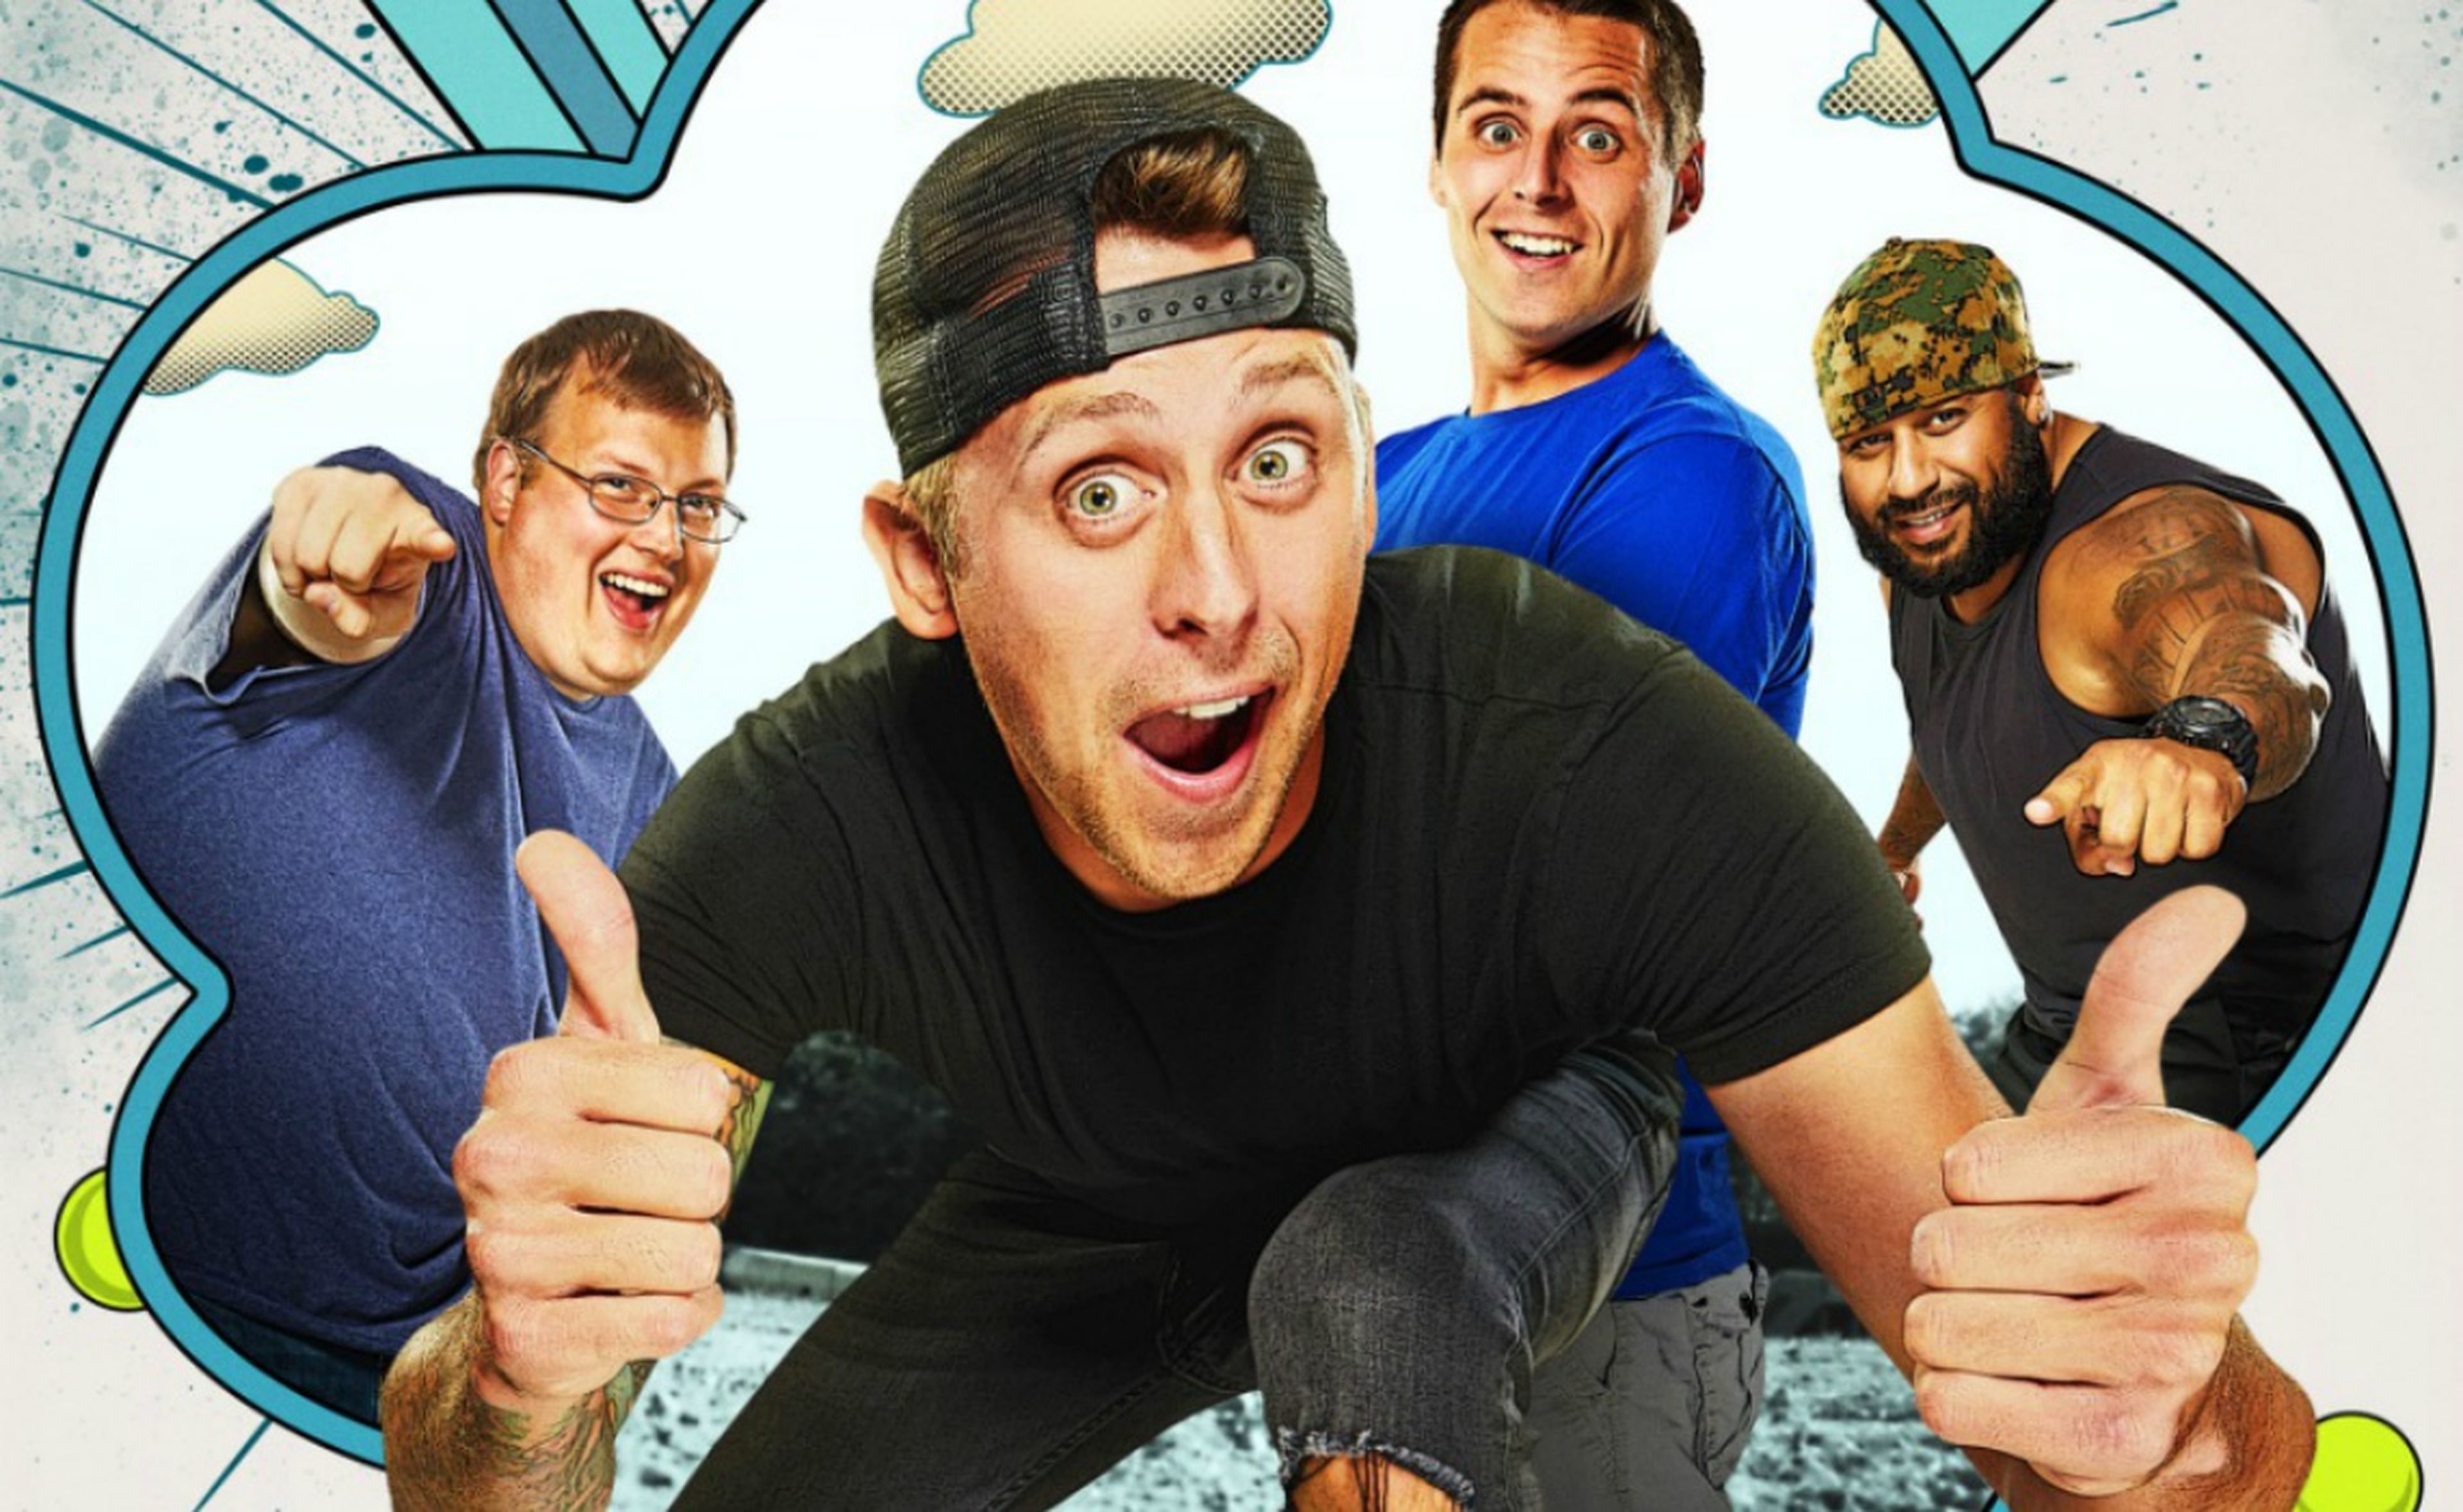 Cartel Roman Atwood’s Day Dreams